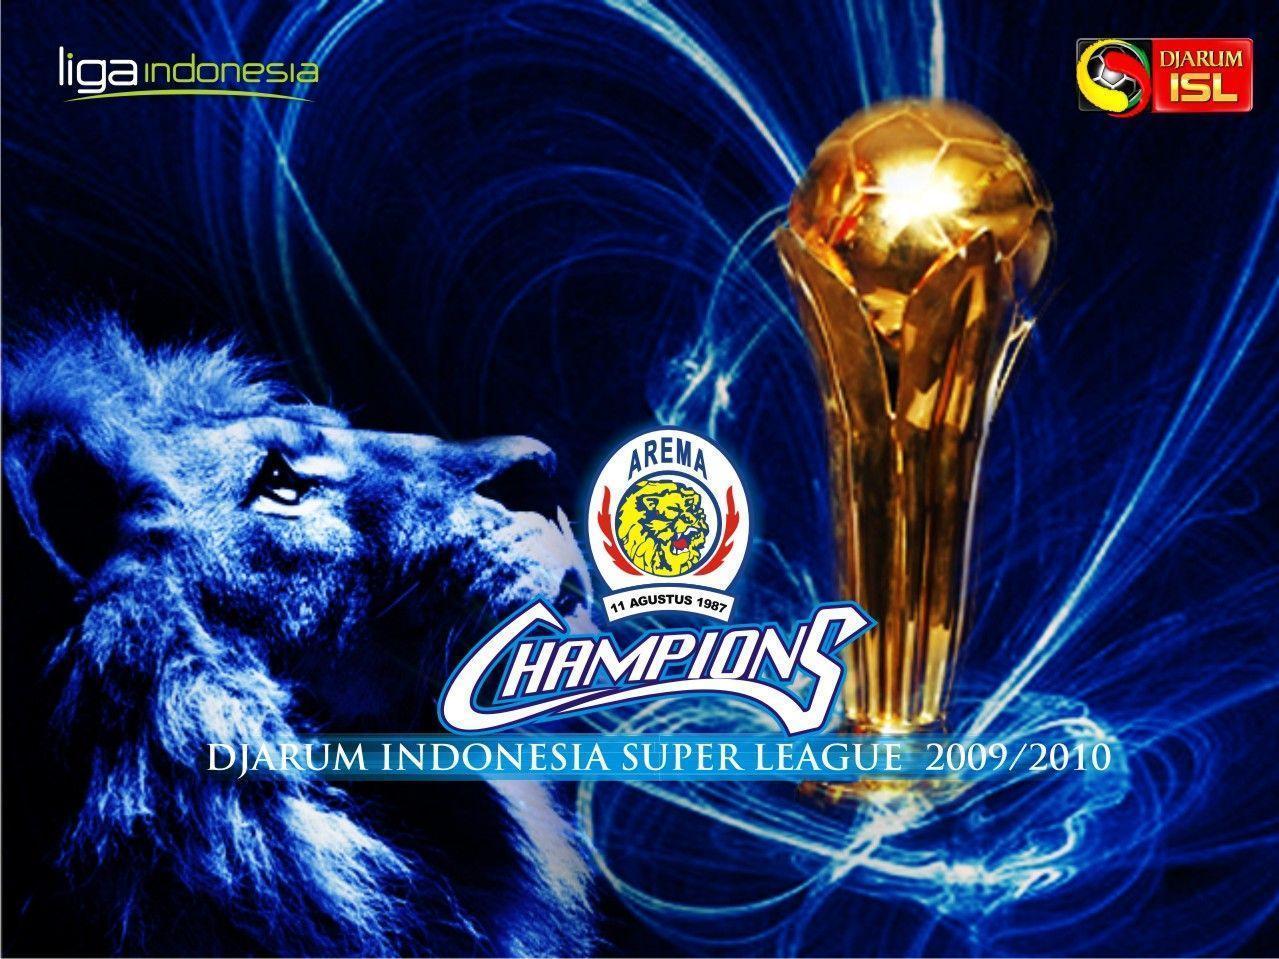 Wallpapers Pictures Photos: Arema Indonesia Pictures